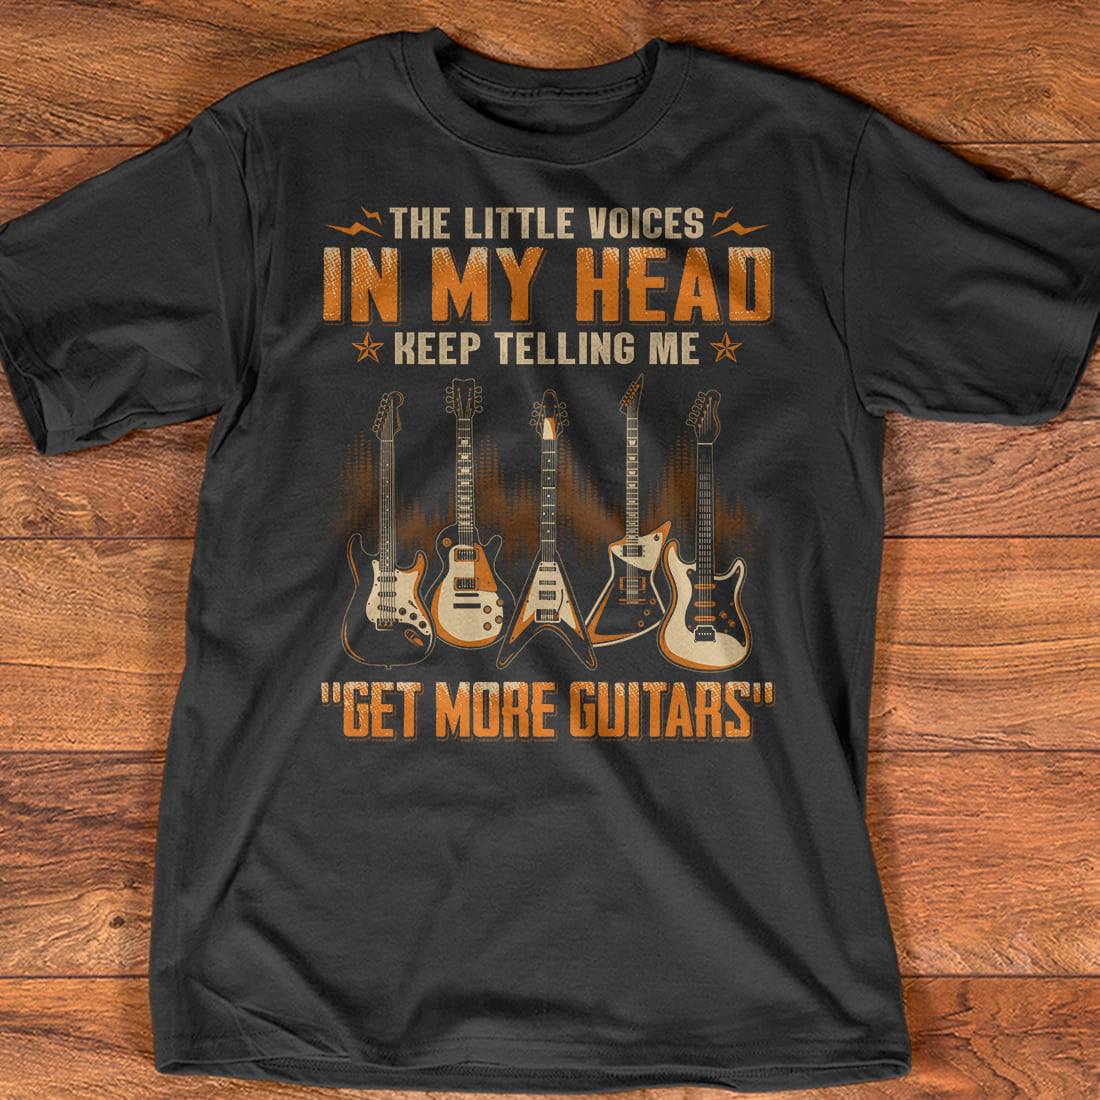 The little voices in my head keep telling me get more guitars - Guitar lover